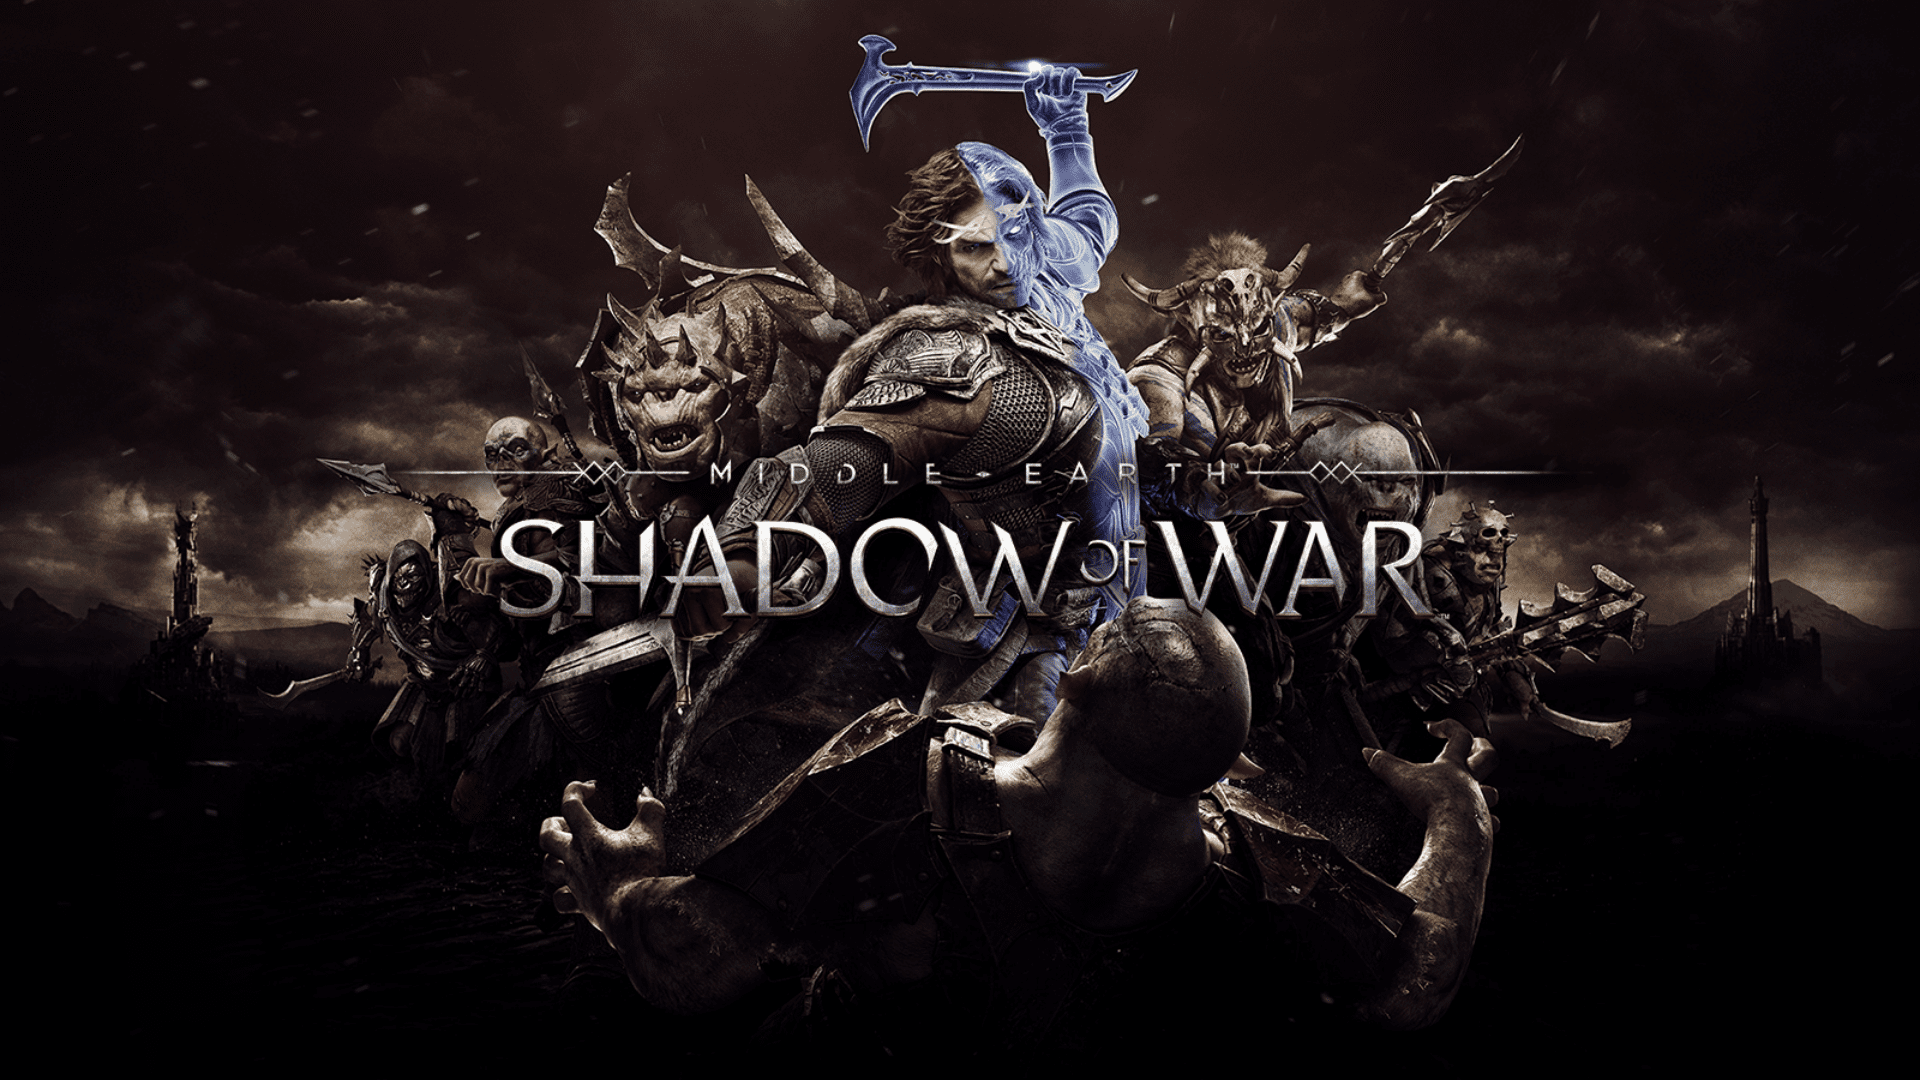 Gamescom 2017: Middle-earth: Shadow of War Receives New Trailer